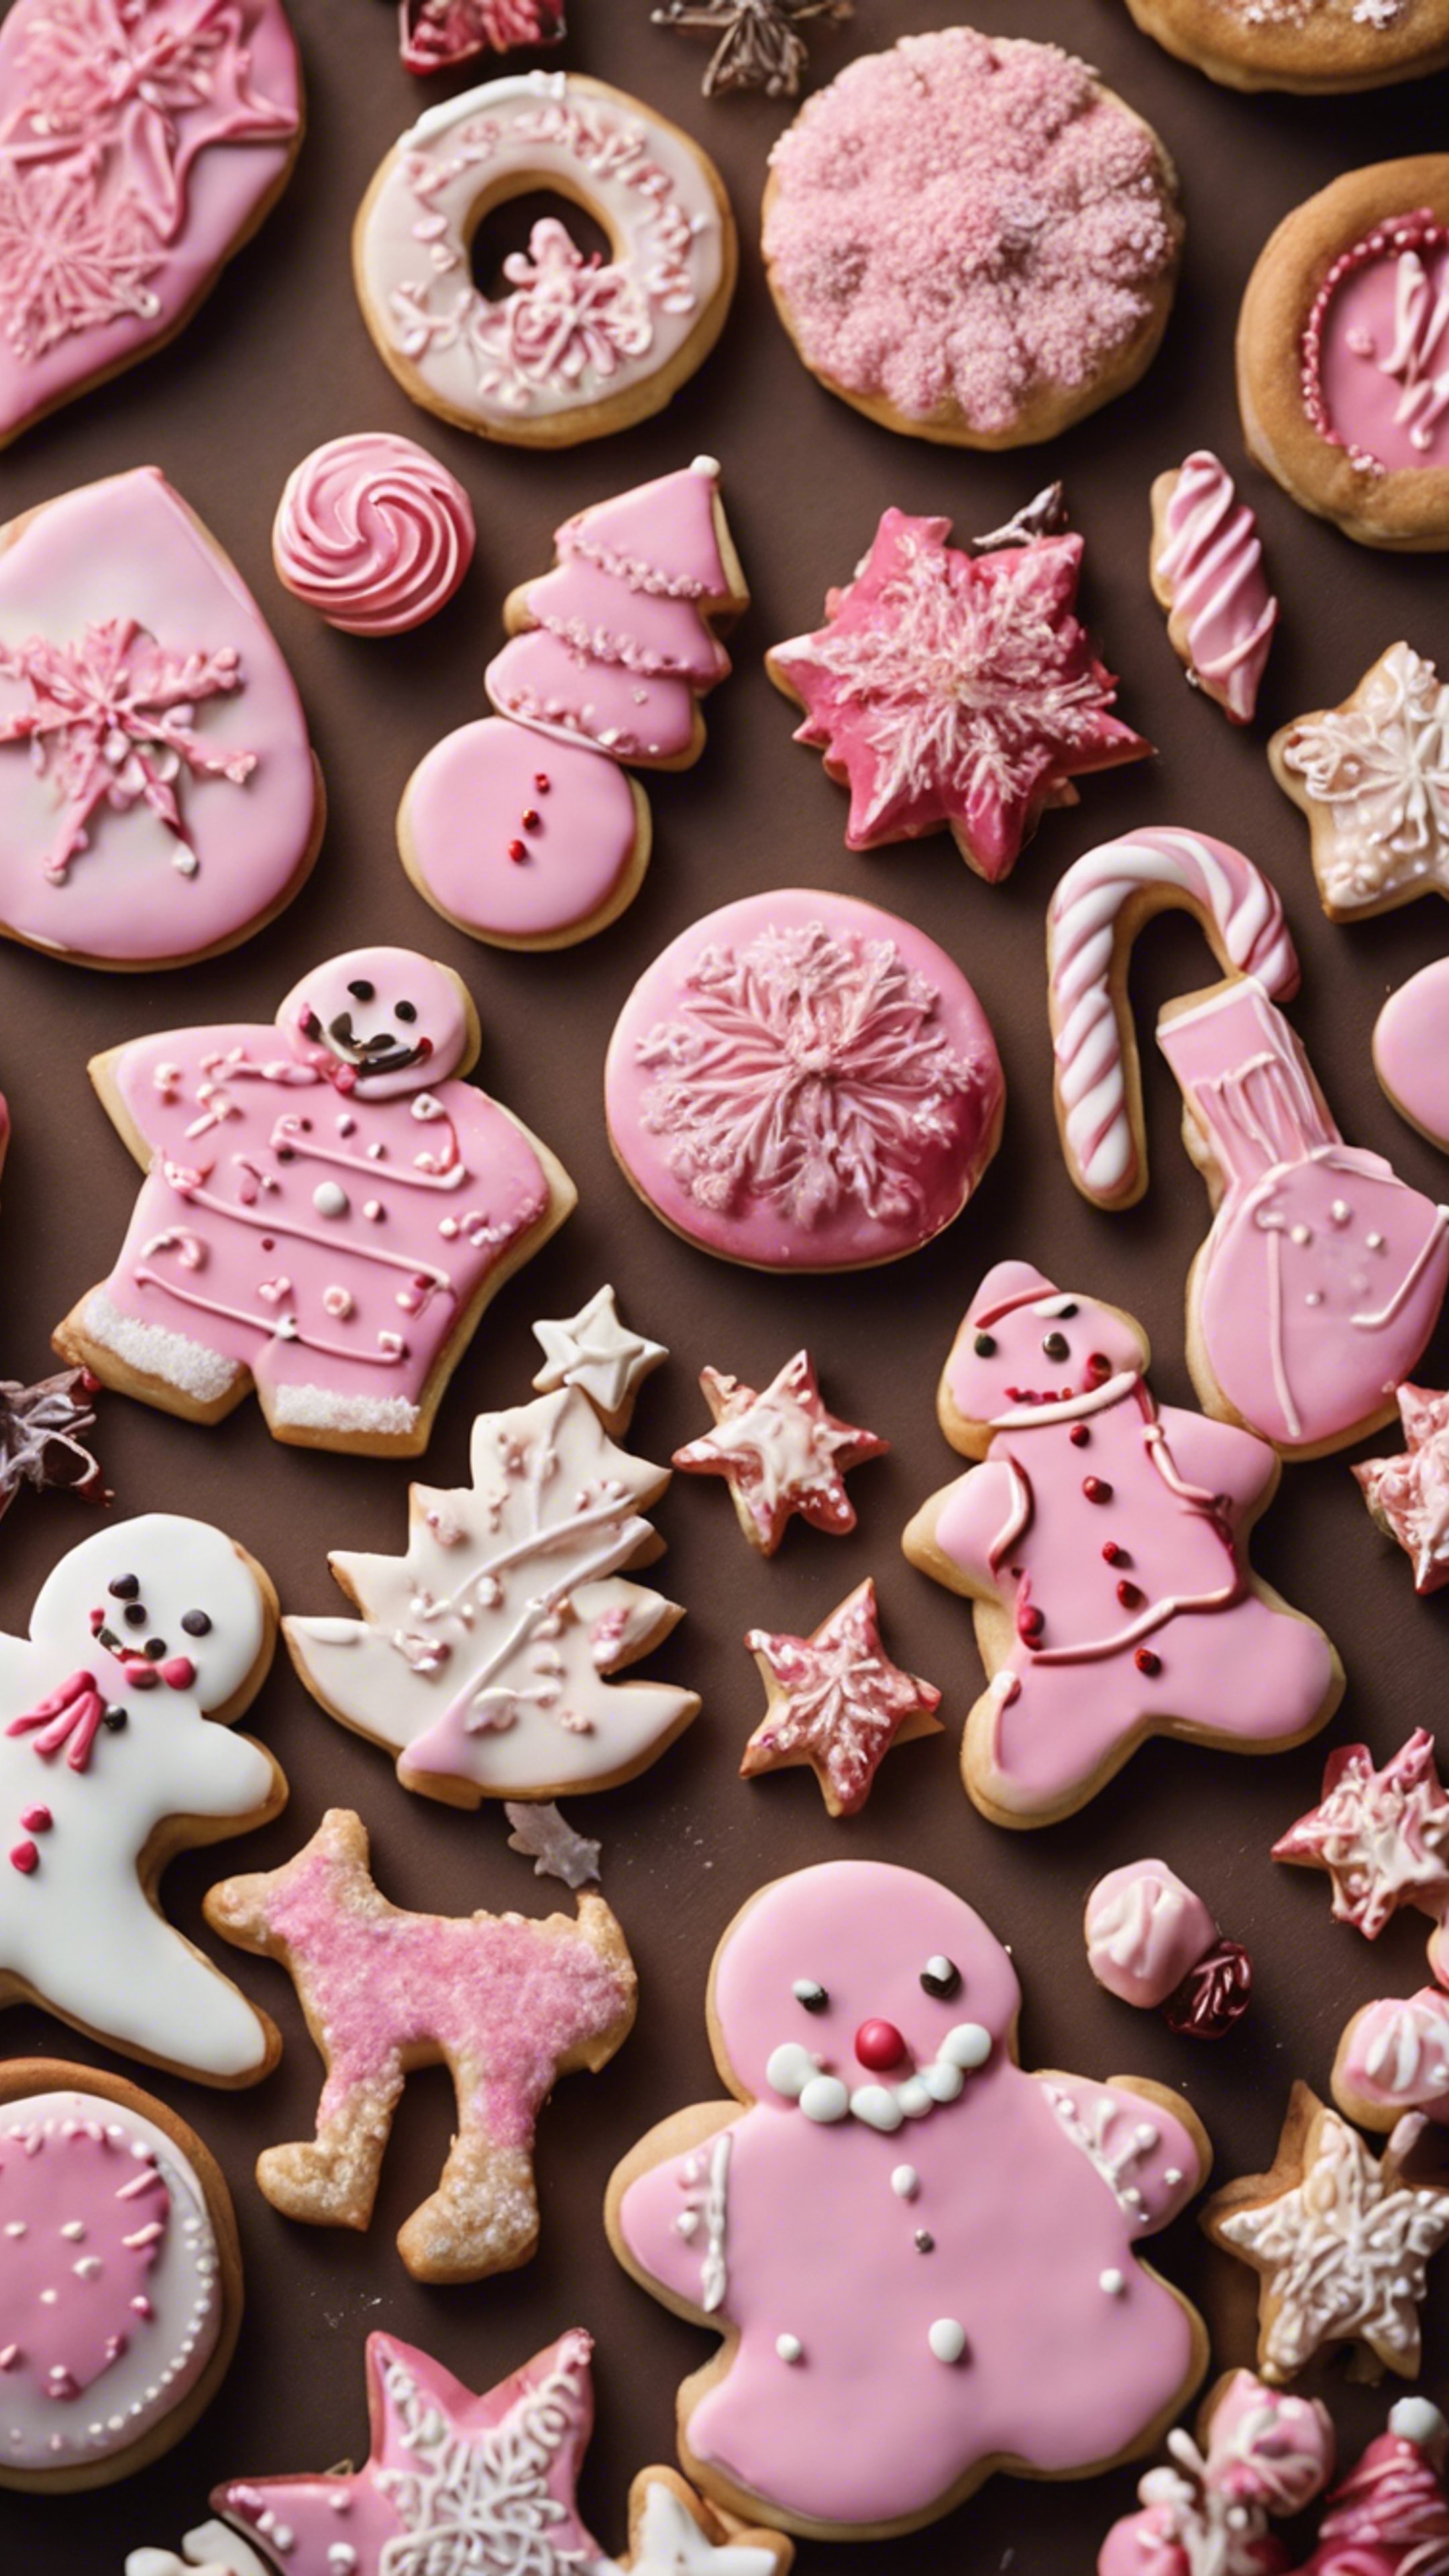 Various types of pink Christmas cookies and sweets laid on a table with festive decorations. Обои[bb72647e6a9944a5b5aa]